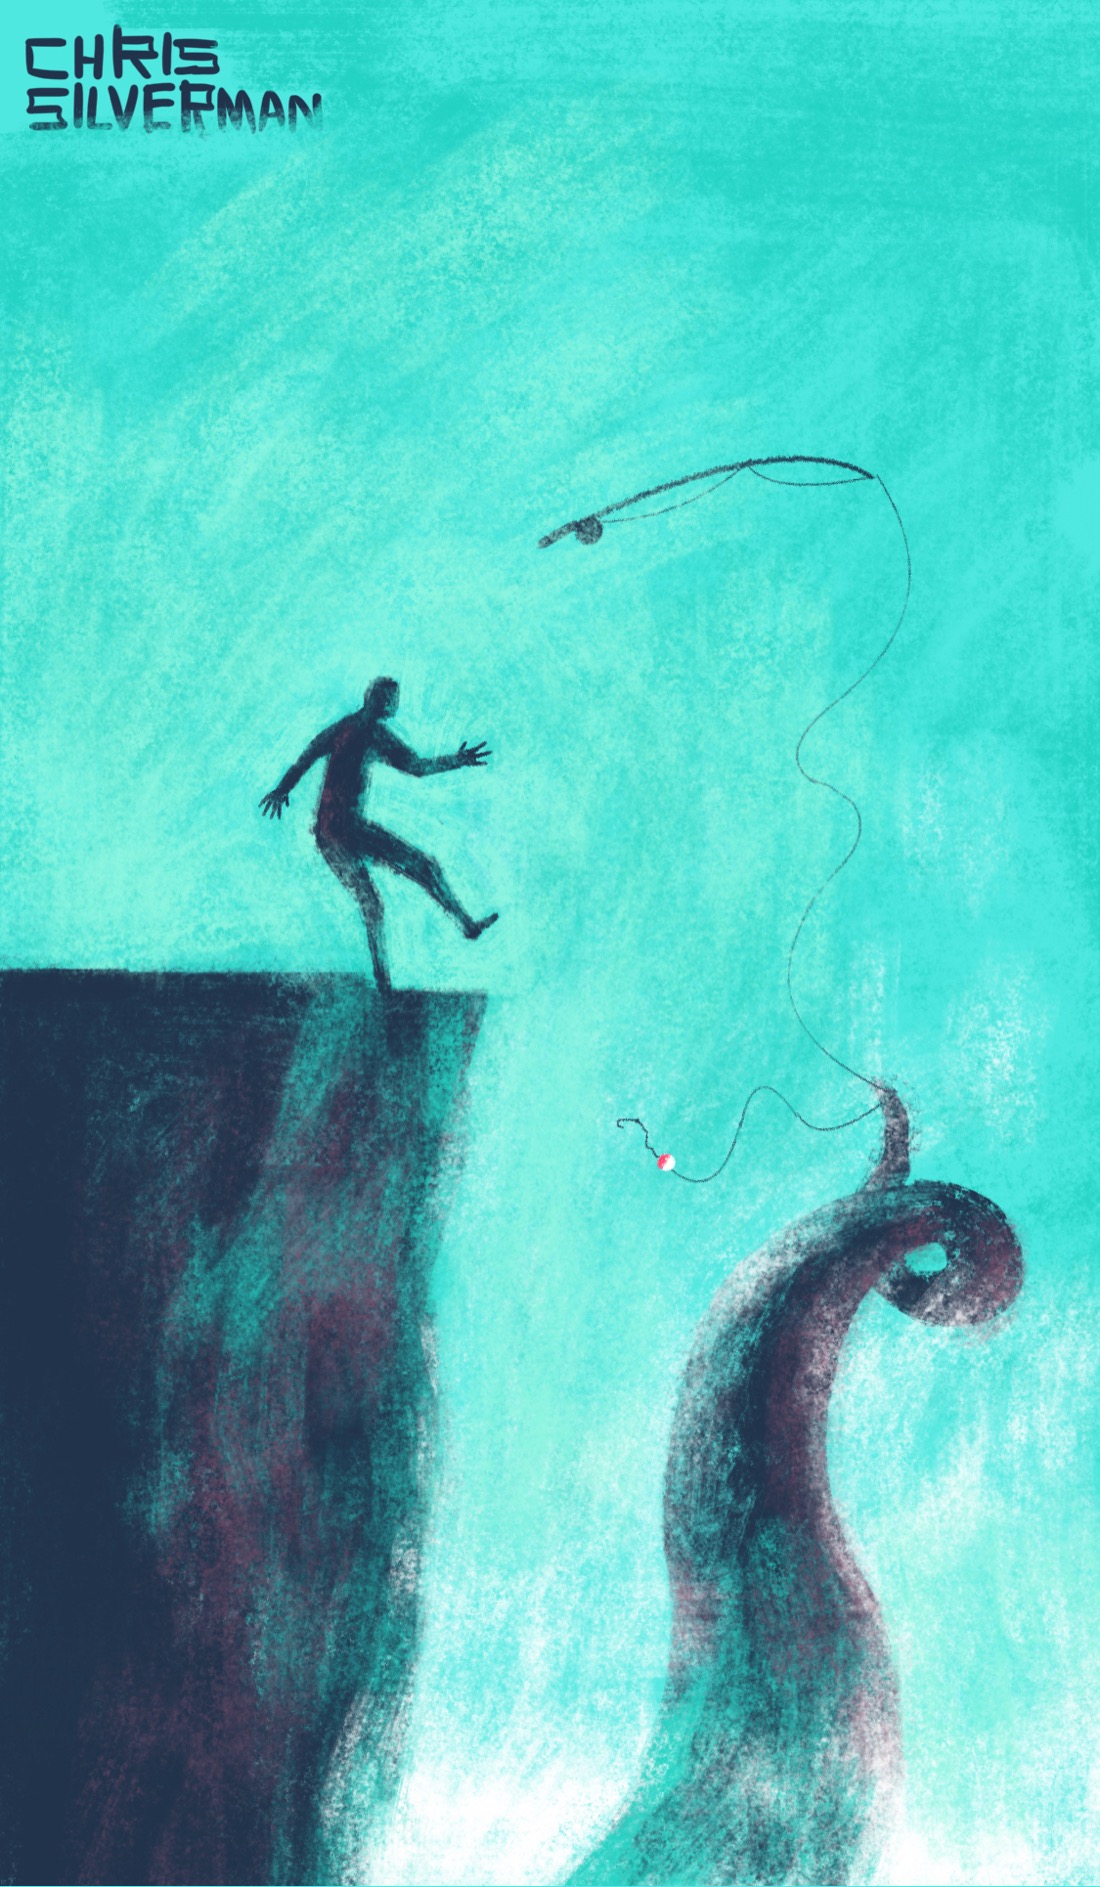 On the left of the drawing is a large rocky cliff with a flat top. On the right is an open space. A huge black tentacle, like that of a monstrous squid or octopus, is reaching up from the bottom of the drawing, yanking a fishing pole out of the hand of a person standing on the top of the cliff. The sky is a greenish blue; the tentacle and the cliff are black. Below, where the tentacle is reaching up from, is white fog and ocean spray.